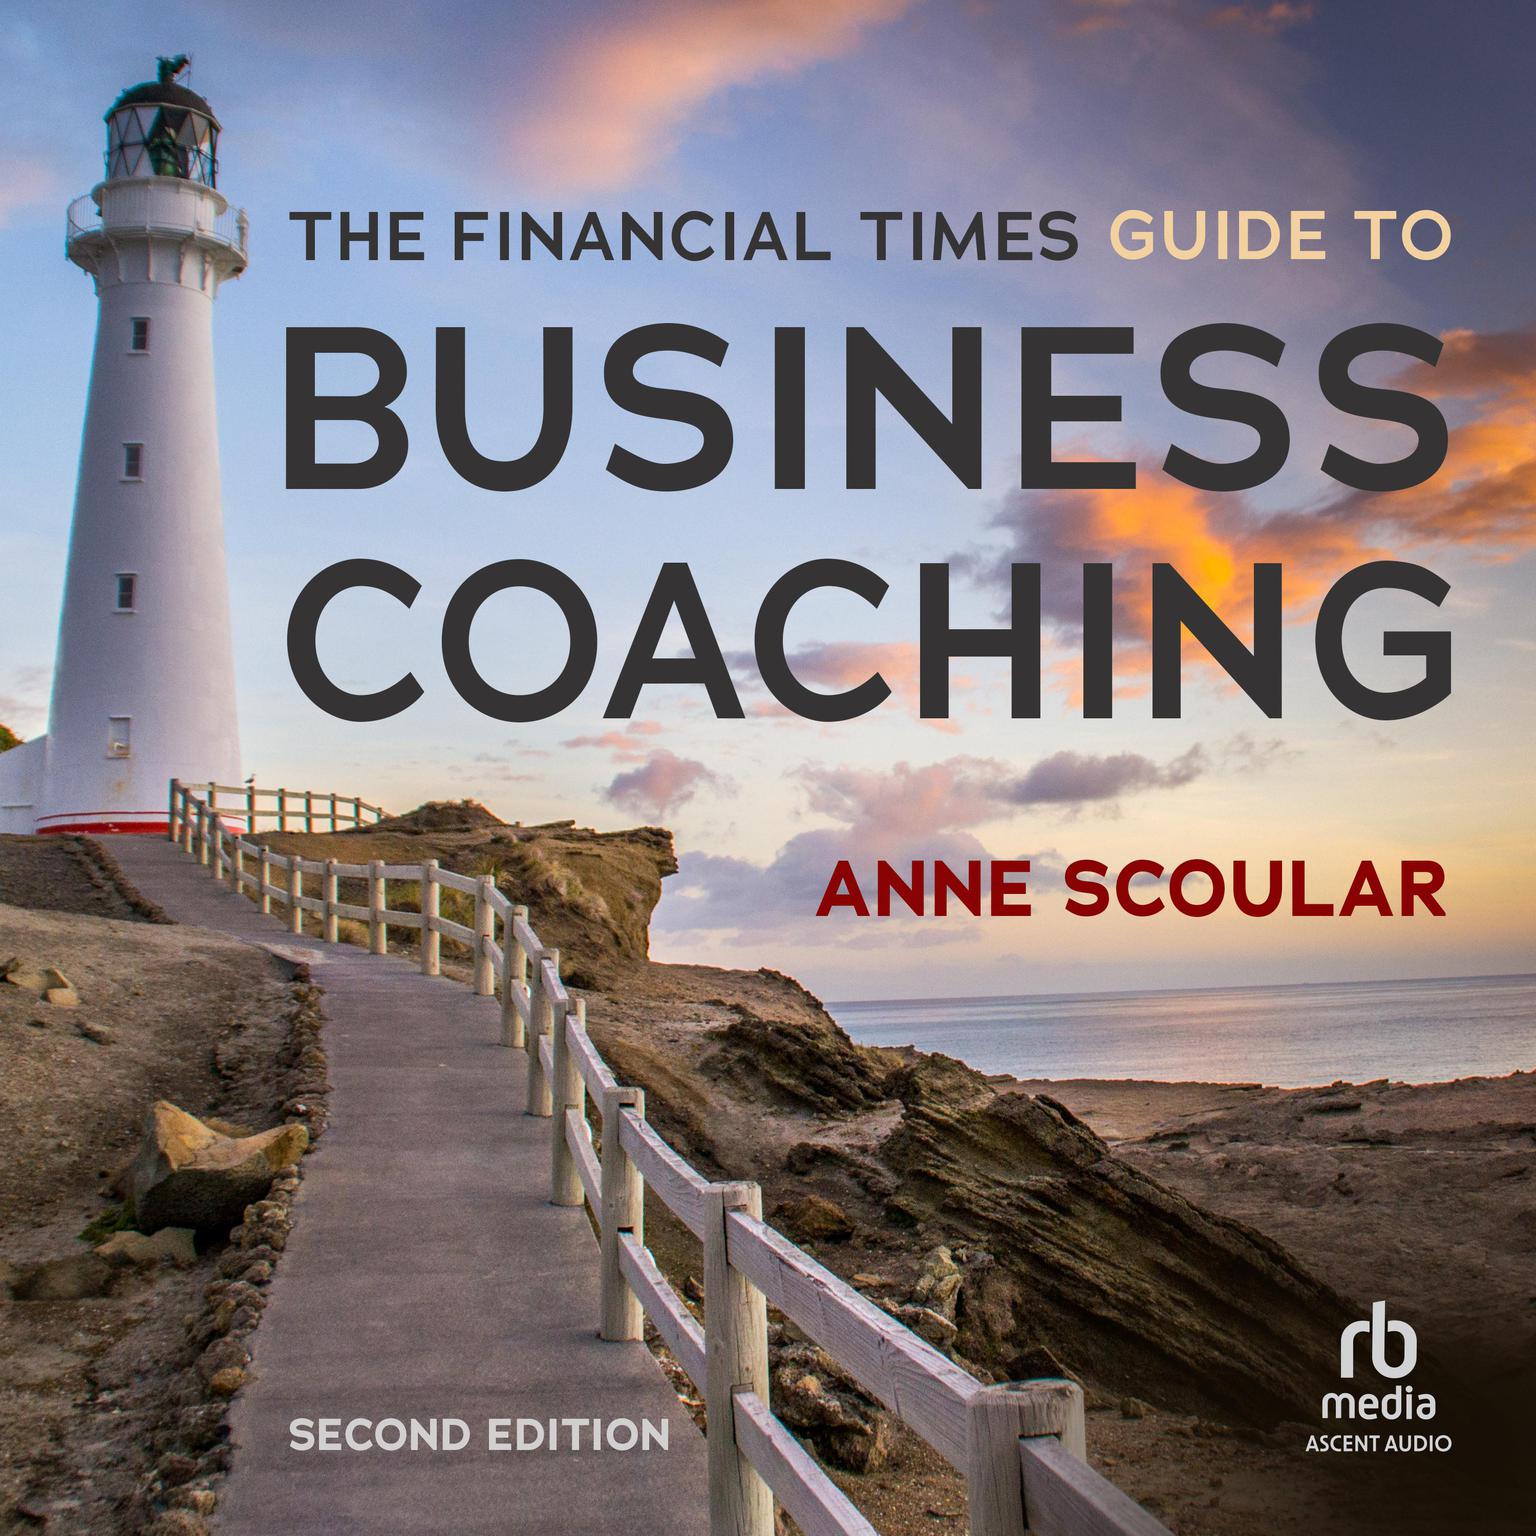 The Financial Times Guide to Business Coaching, 2nd Edition Audiobook, by Anne Scoular